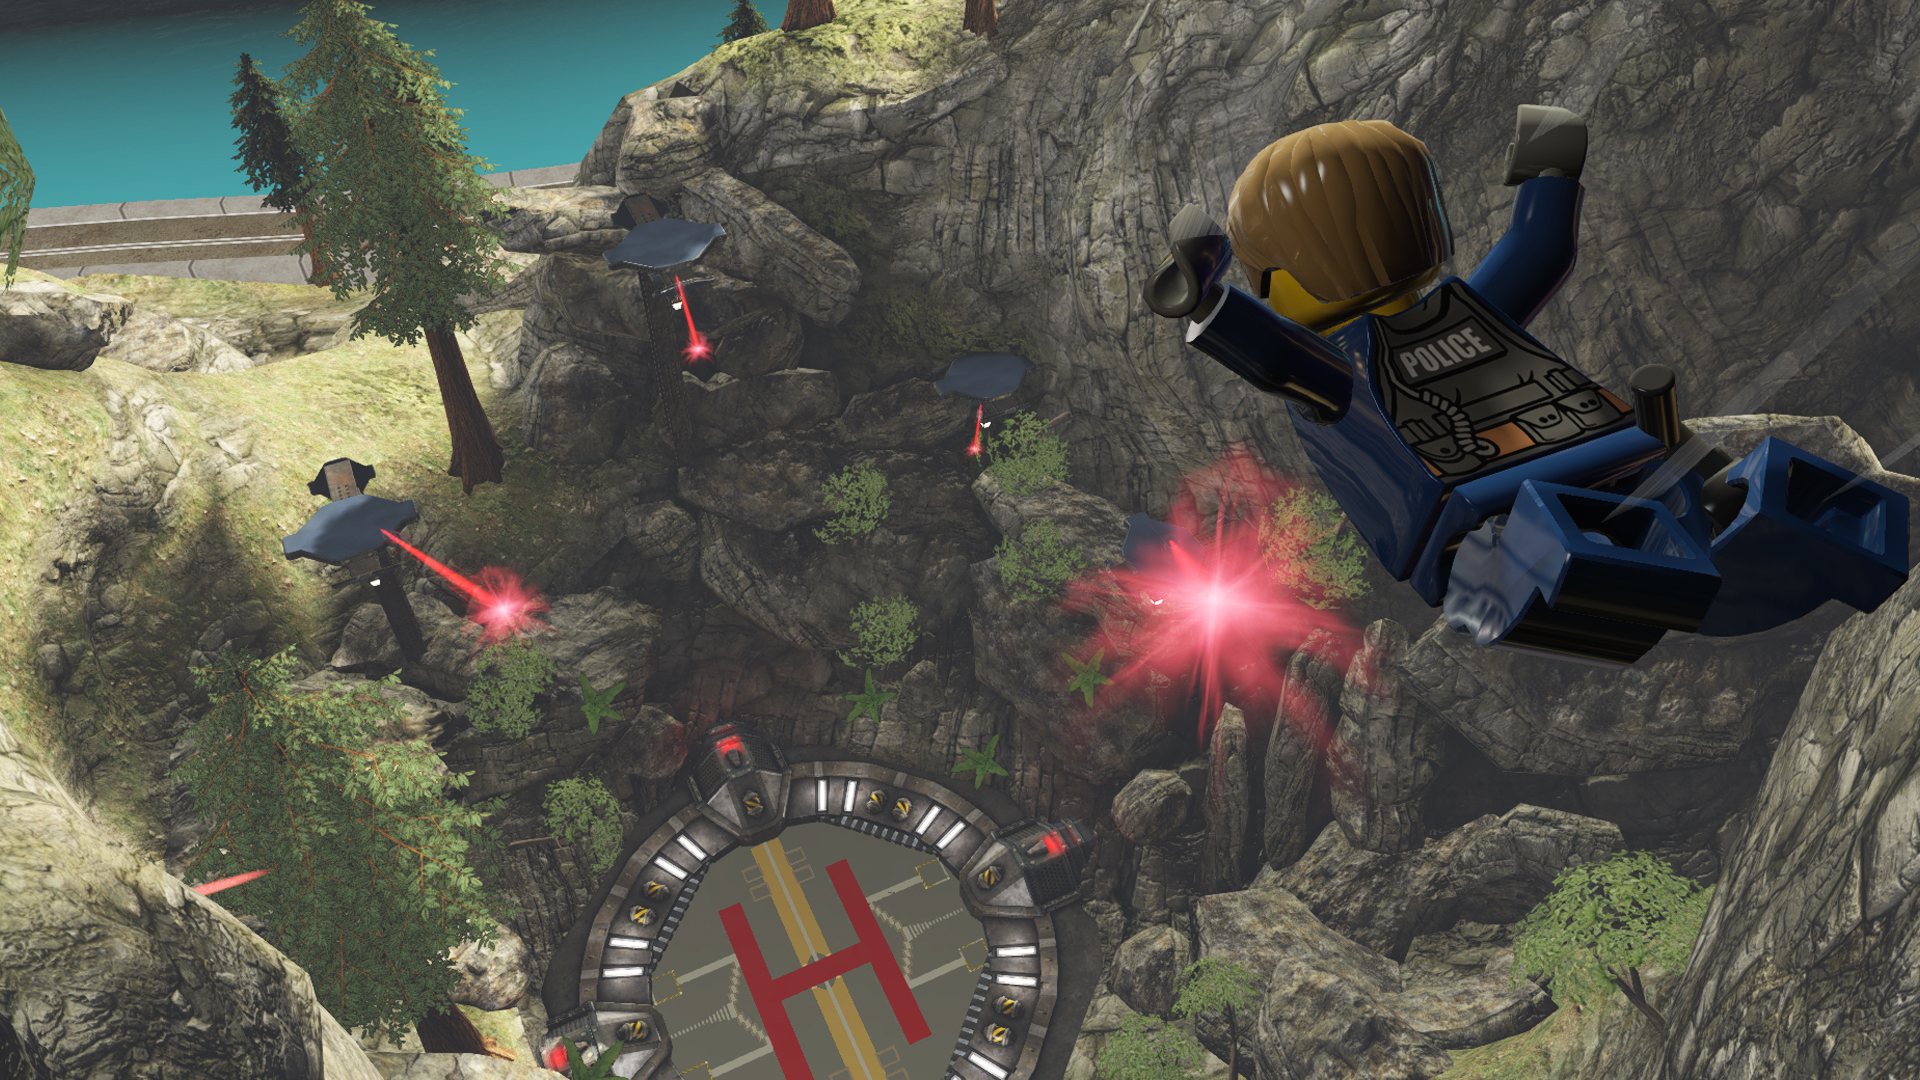 LEGO City Undercover Pc Game Free Download Torrent